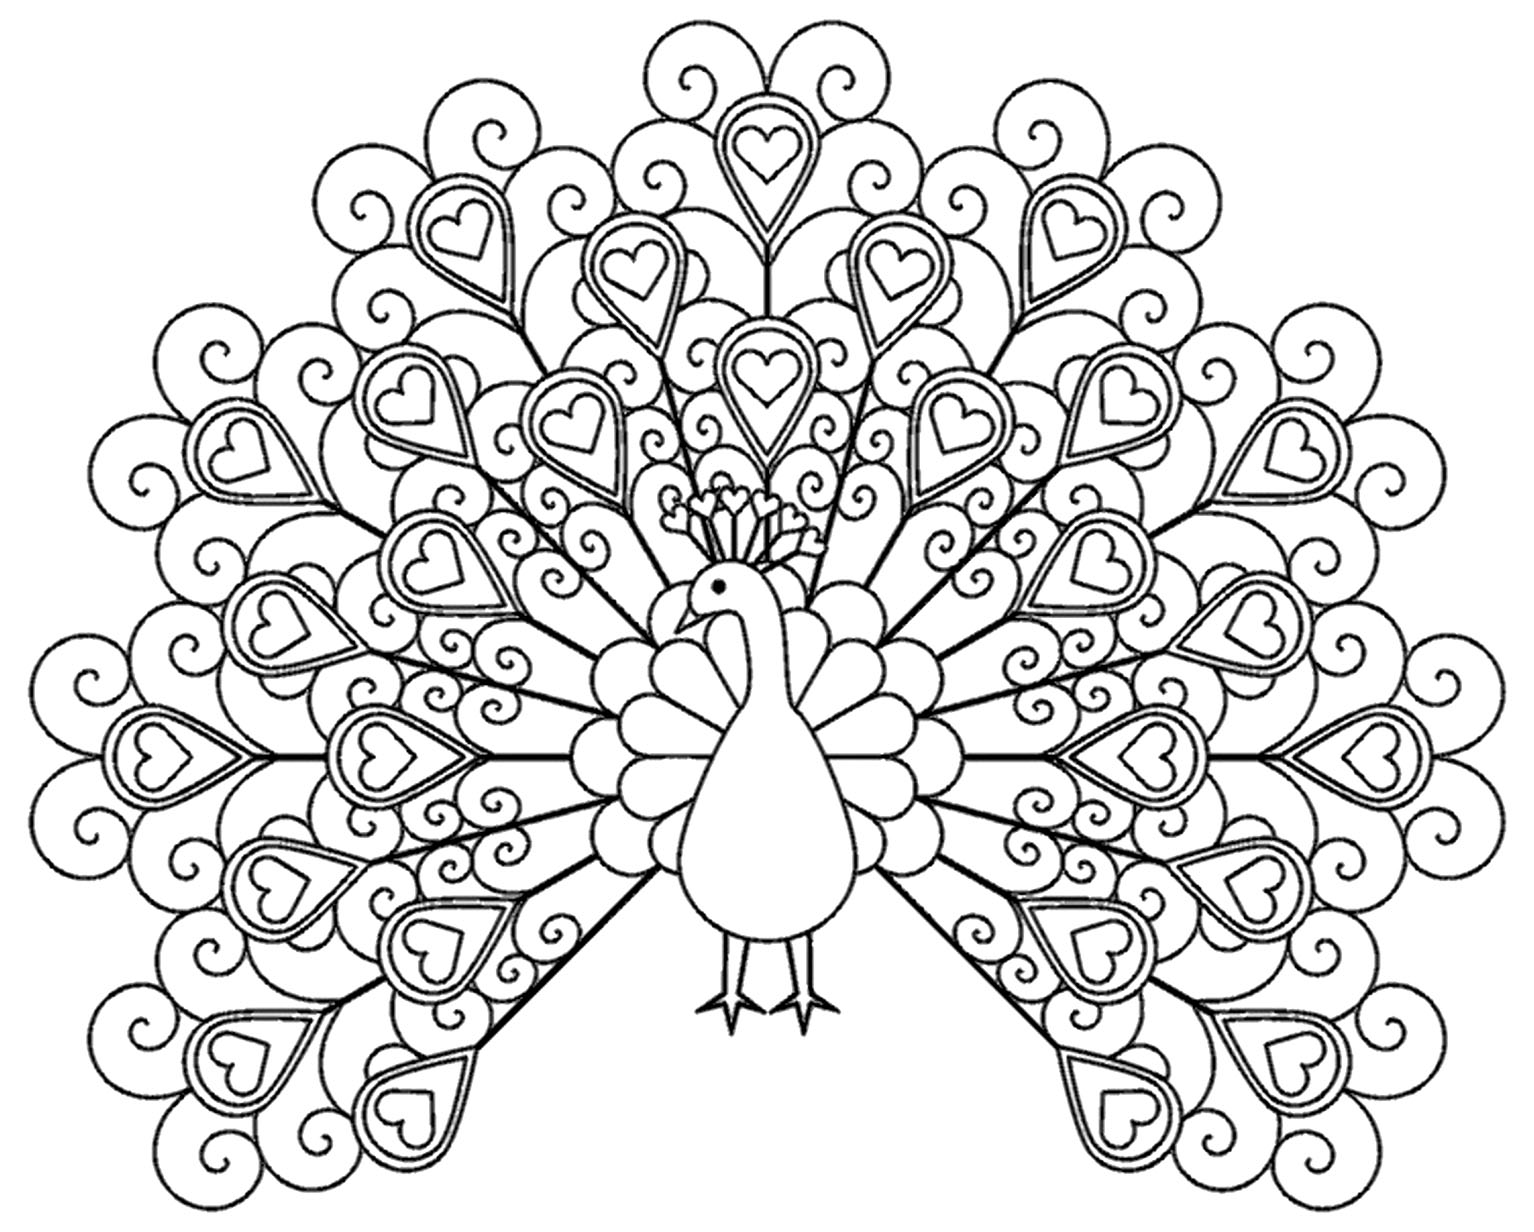 Peacock coloring pages for kids